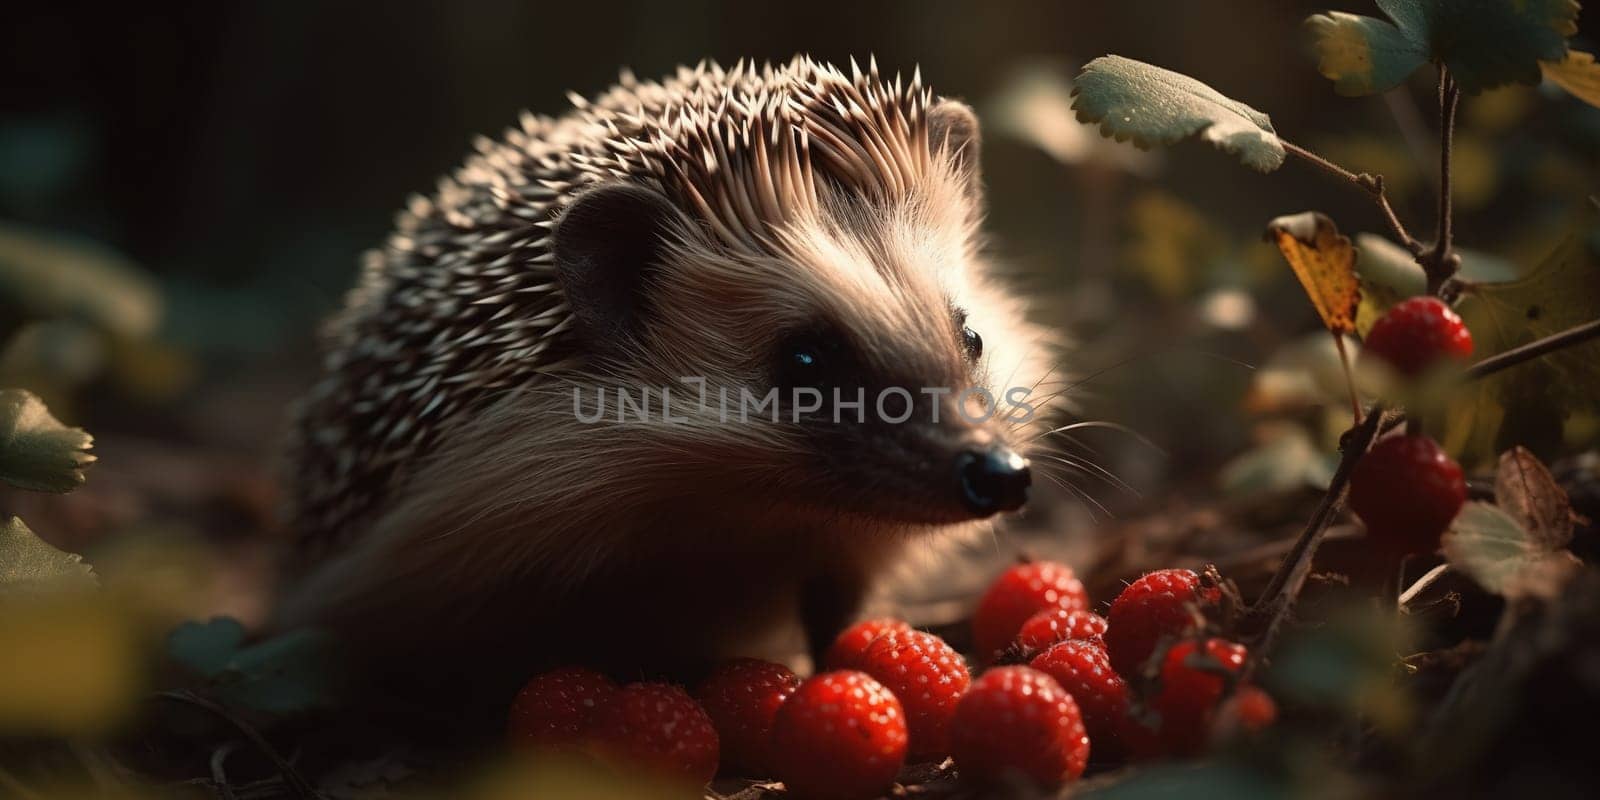 Cute Wild Hedgehog Eating Raspberry In Autumn Forest, Animal In Natural Habitat